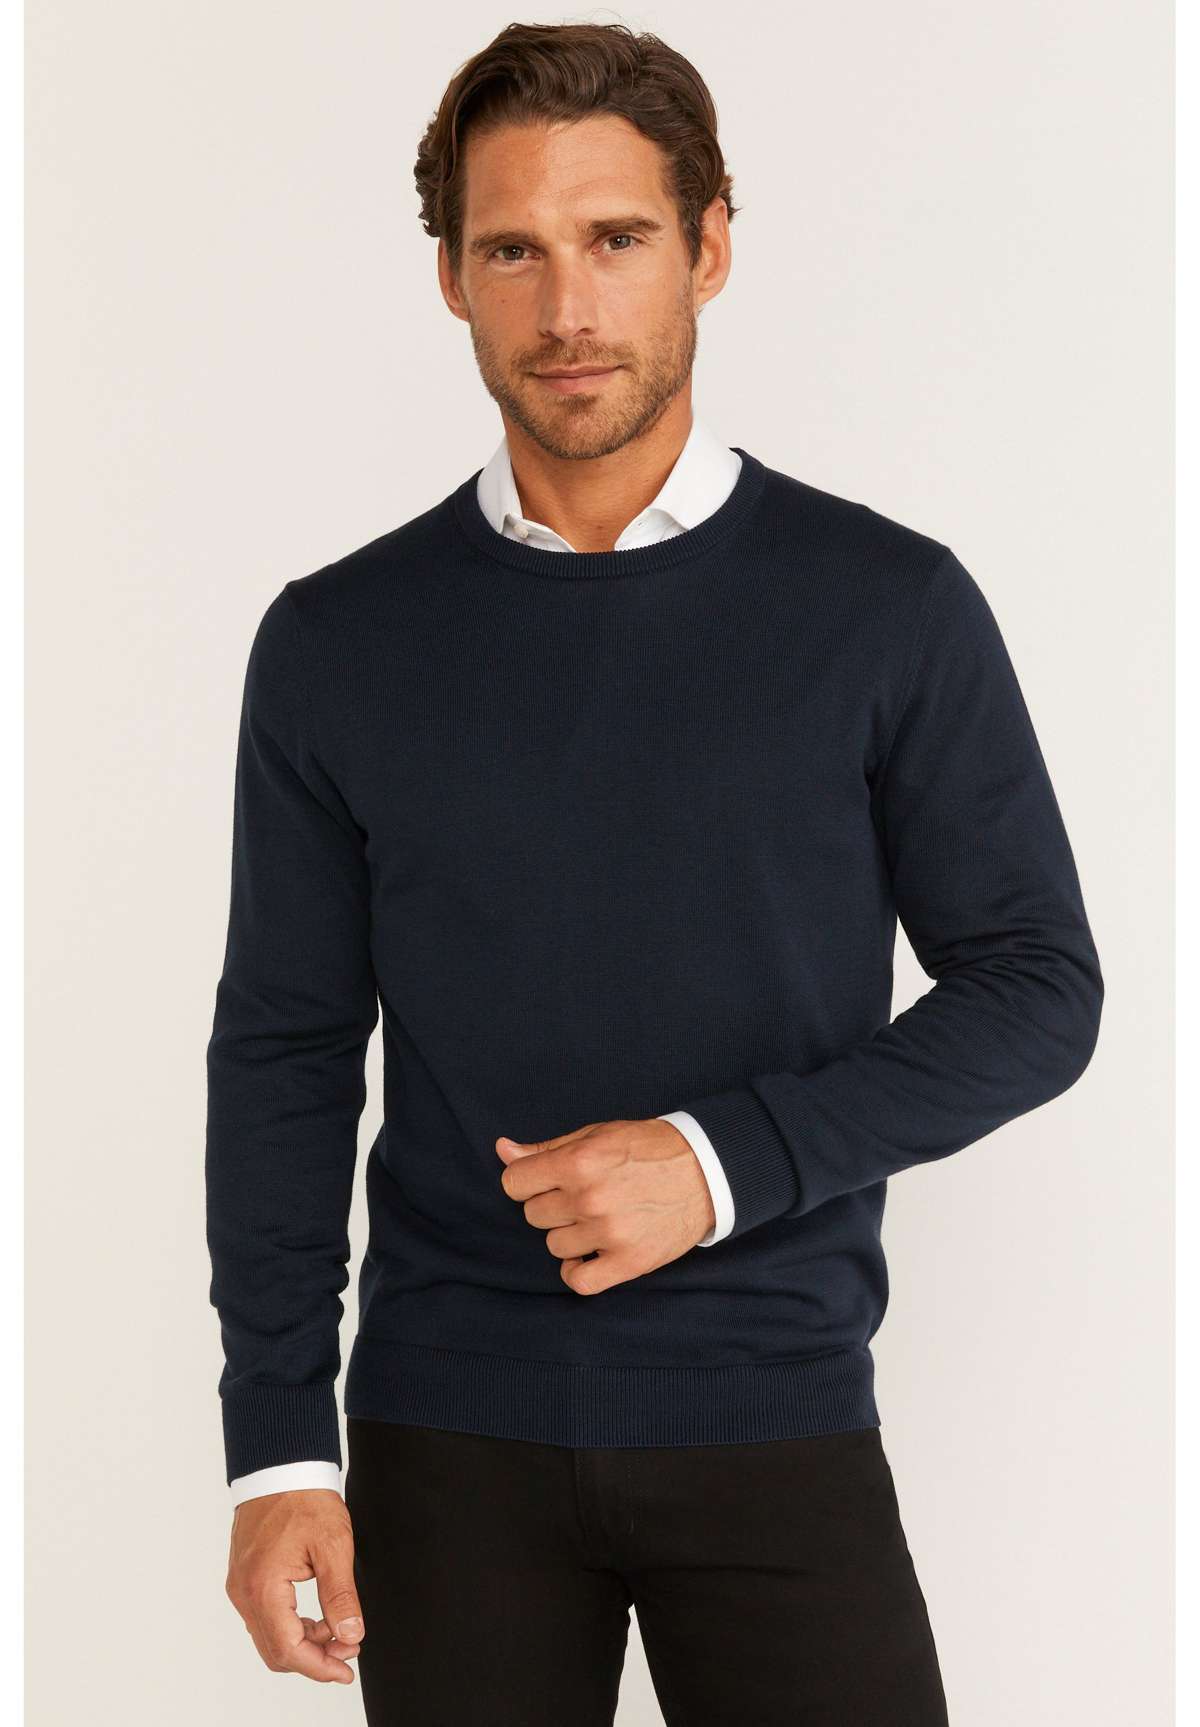 Пуловер Menton knitted sweater Menton knitted sweater